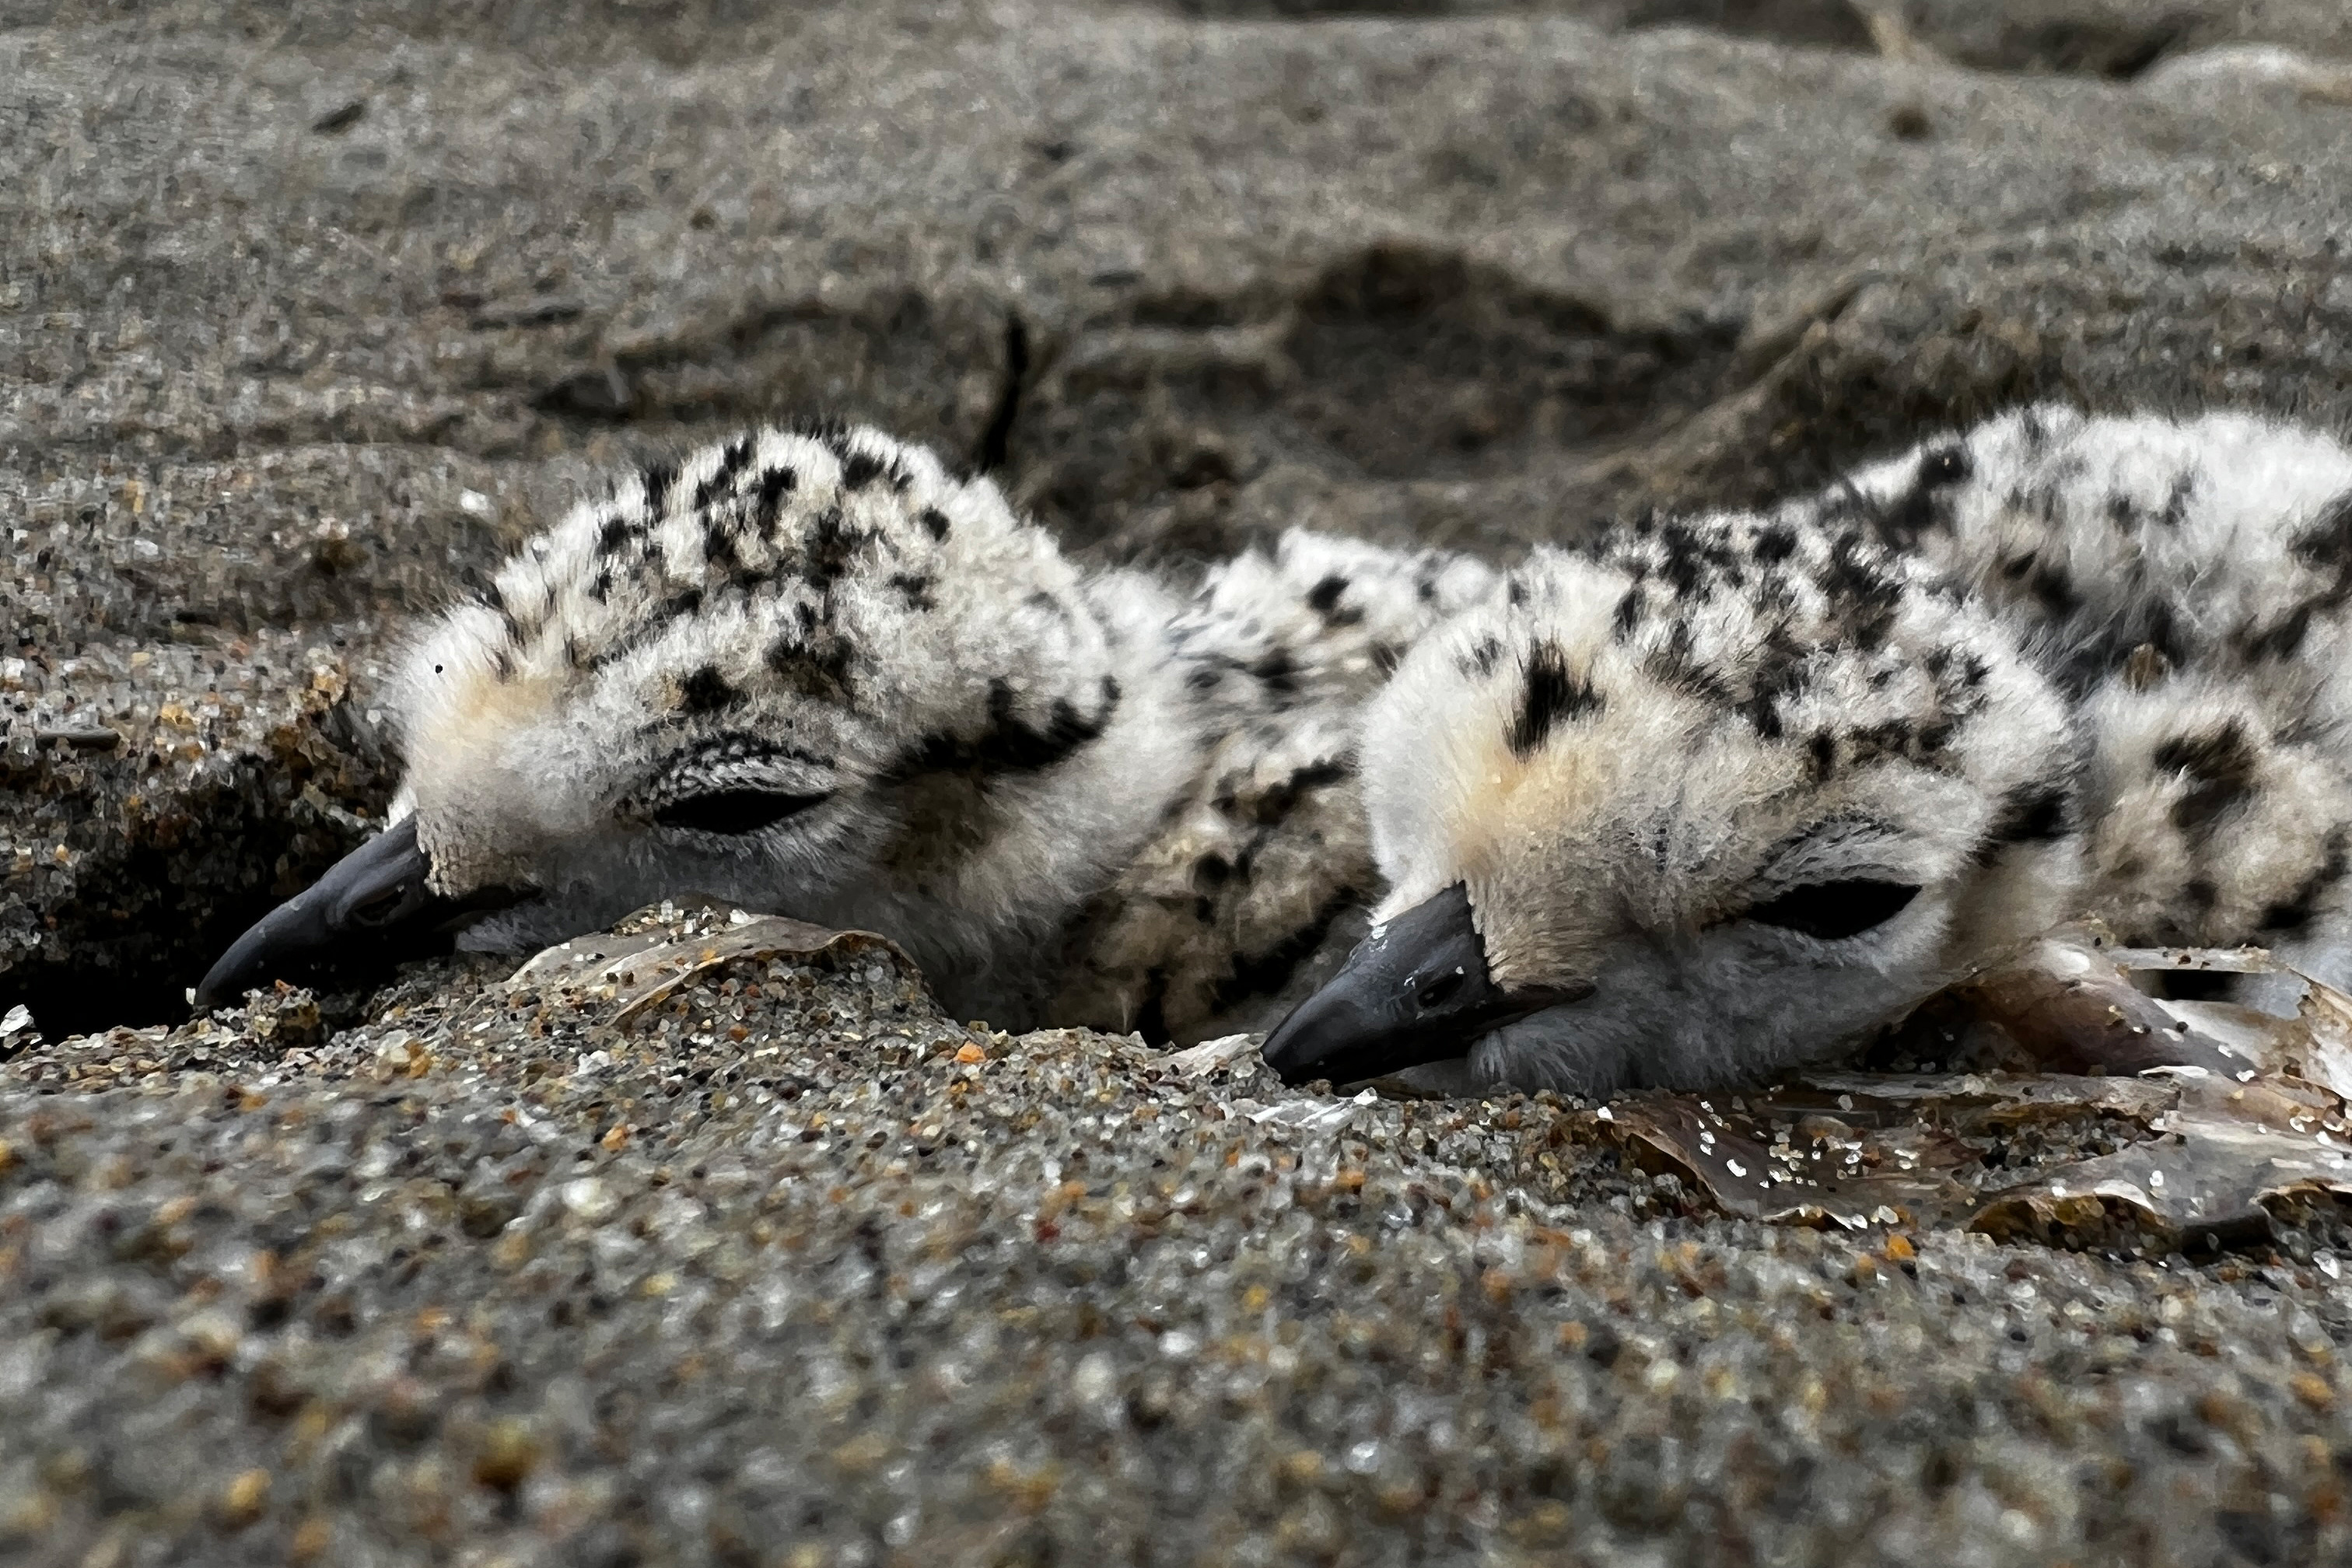 A close-up photo of the faces of two small black-speckled, beige-colored chicks on a sandy beach.